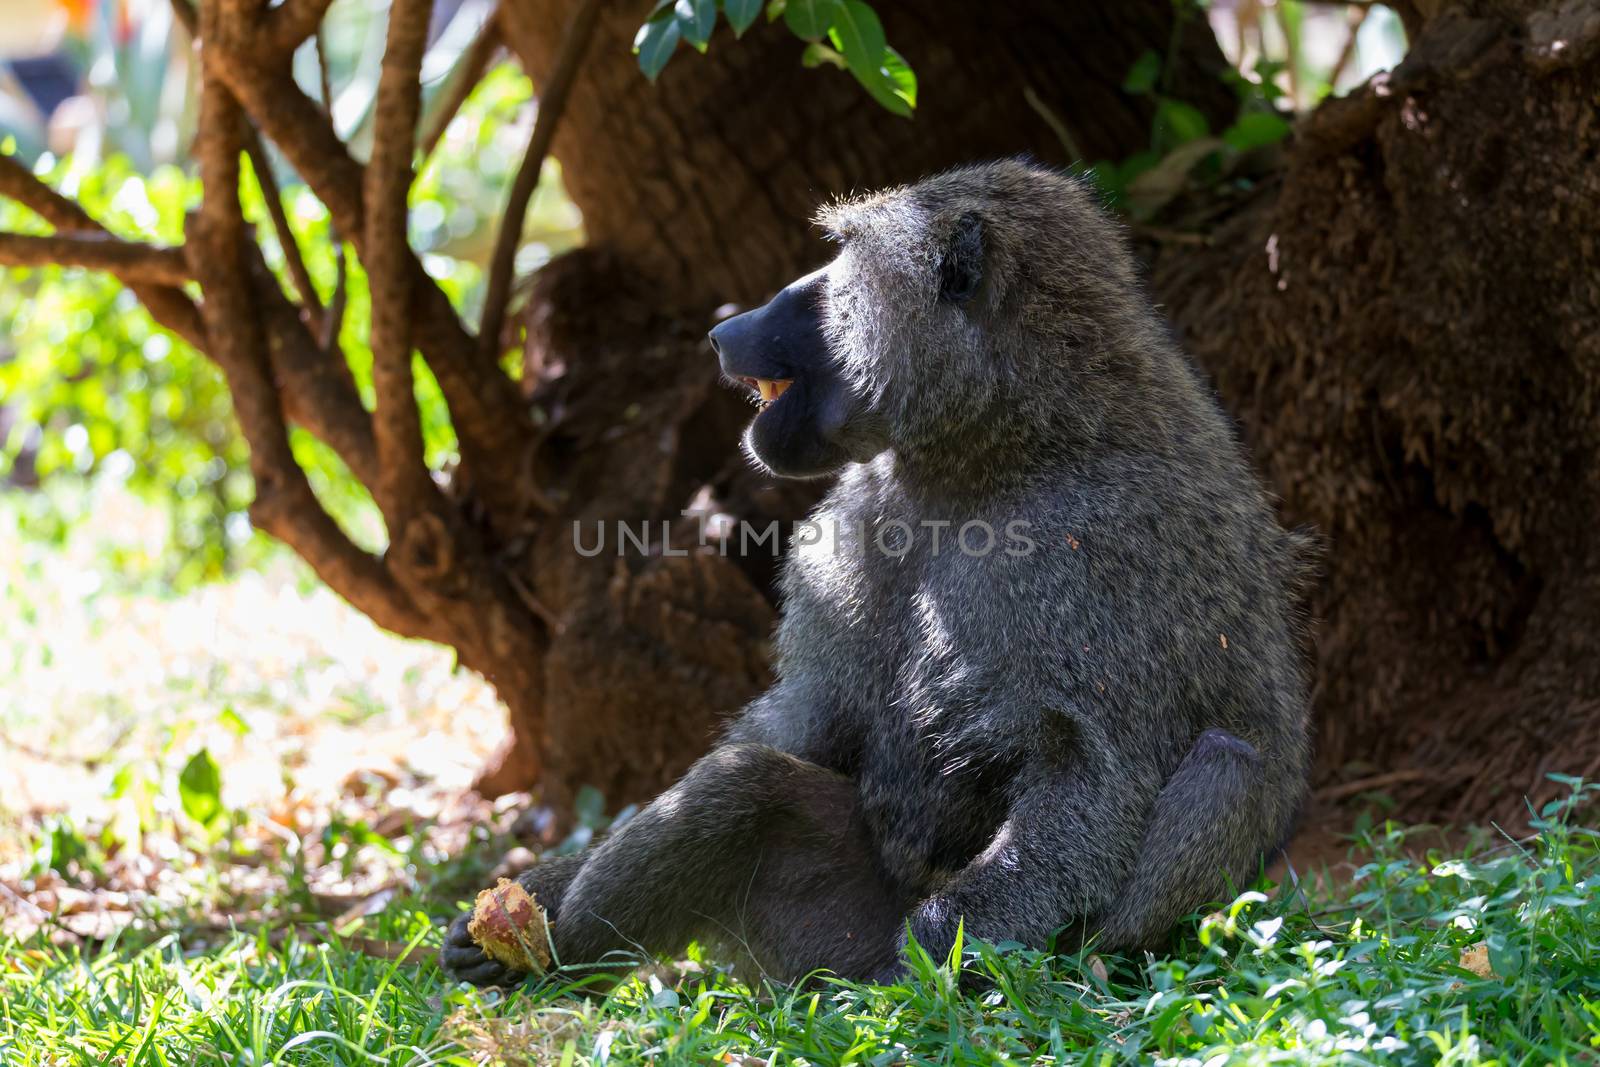 One baboon has found a fruit and eats it